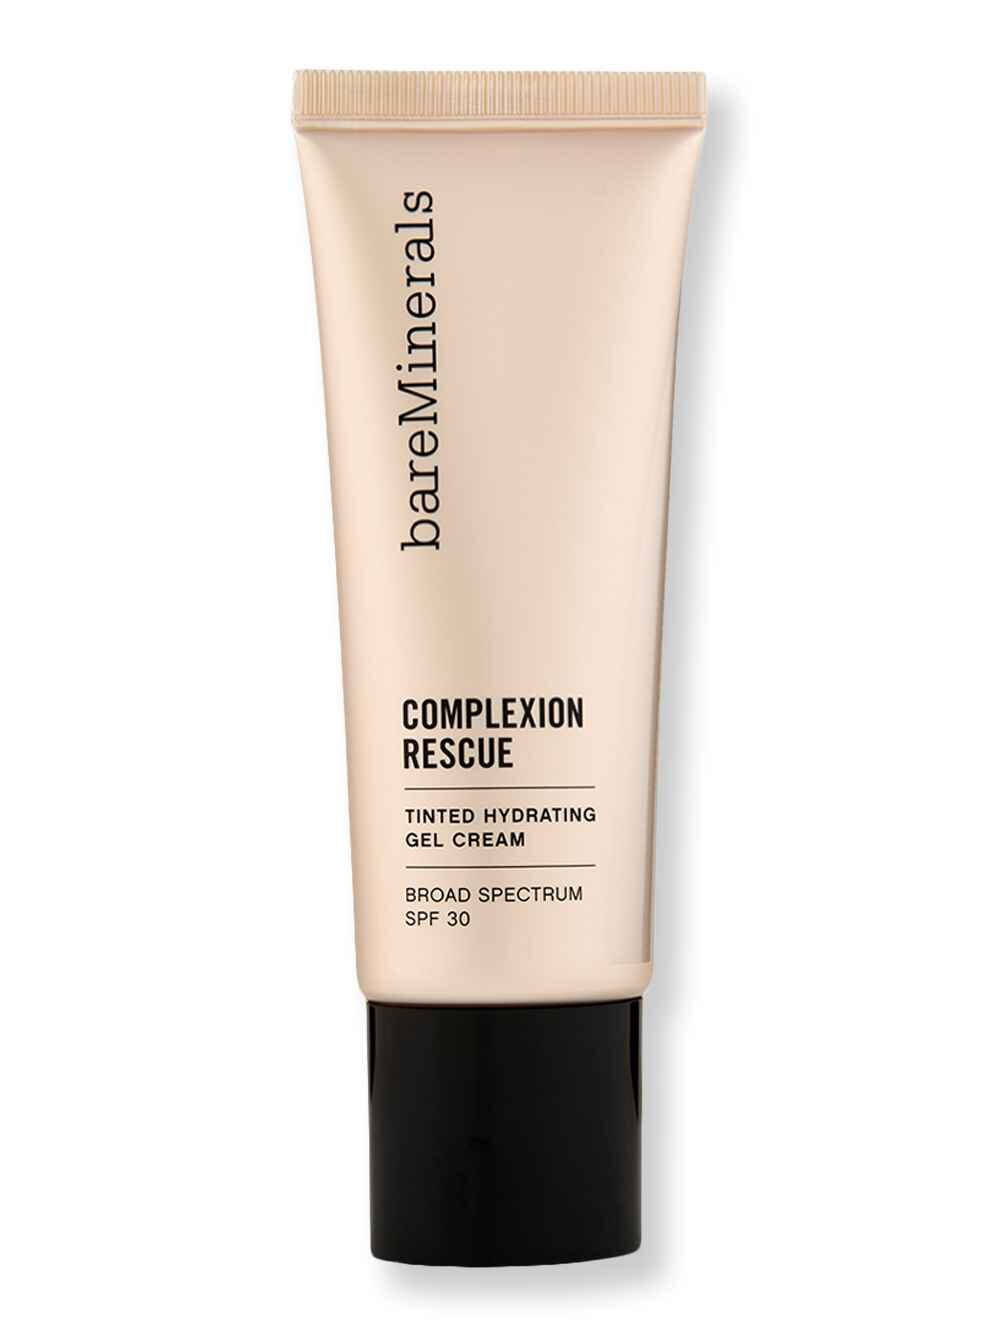 Bareminerals Bareminerals Complexion Rescue Tinted Moisturizer Hydrating Gel Cream SPF 30 Bamboo 5.5 1.18 fl oz35 ml Tinted Moisturizers & Foundations 